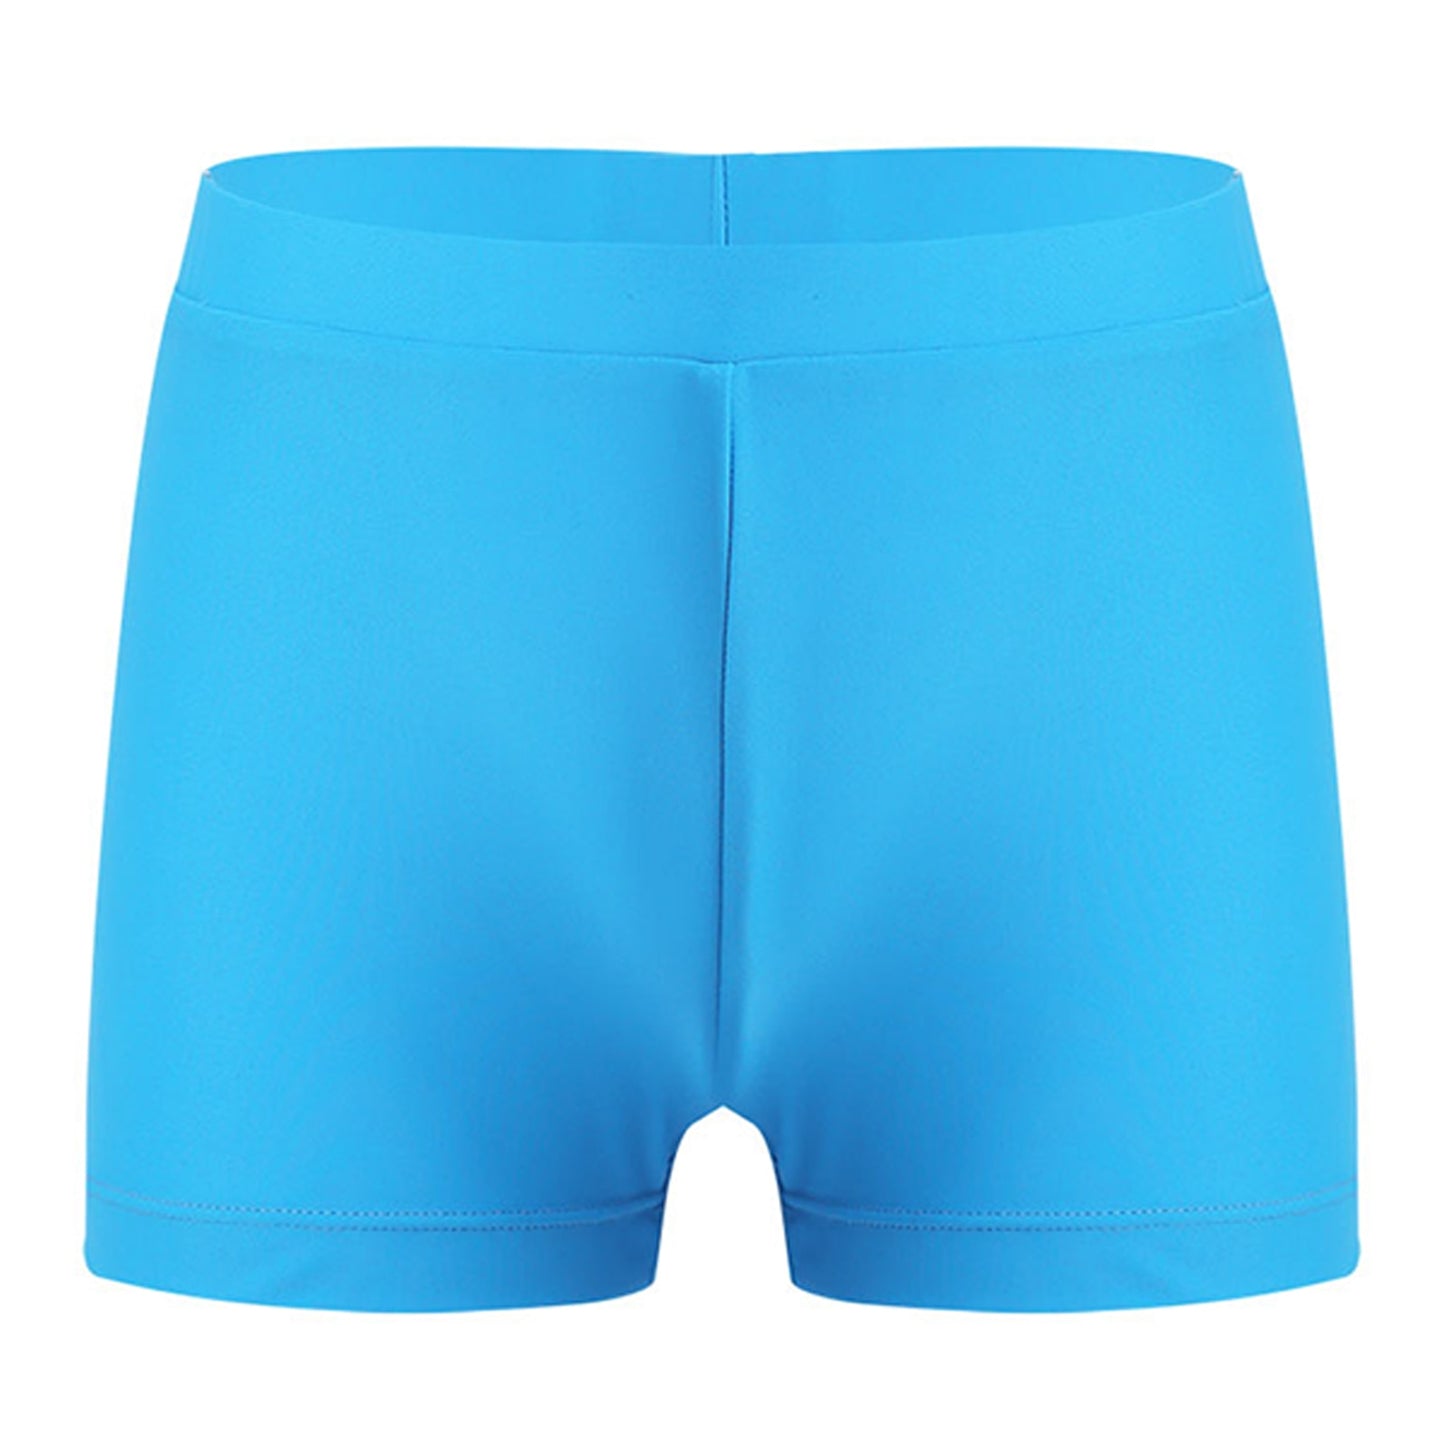 Child Girls Quick-dry Swimming Trunks Elastic Waistband Solid Color Swimwear